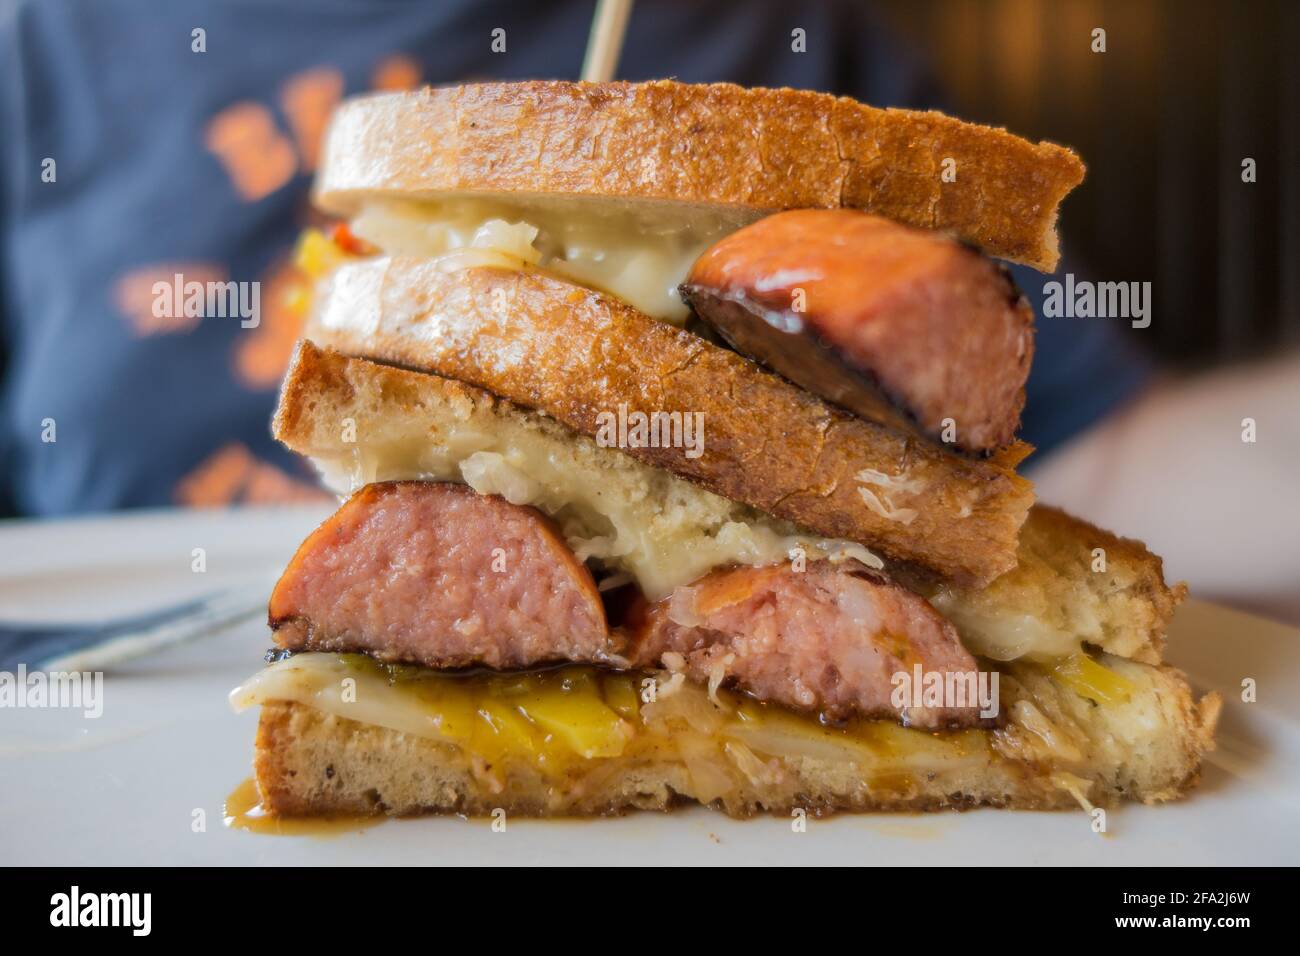 Delicious grilled sandwich with sausage, cheese and sauerkraut. Stock Photo